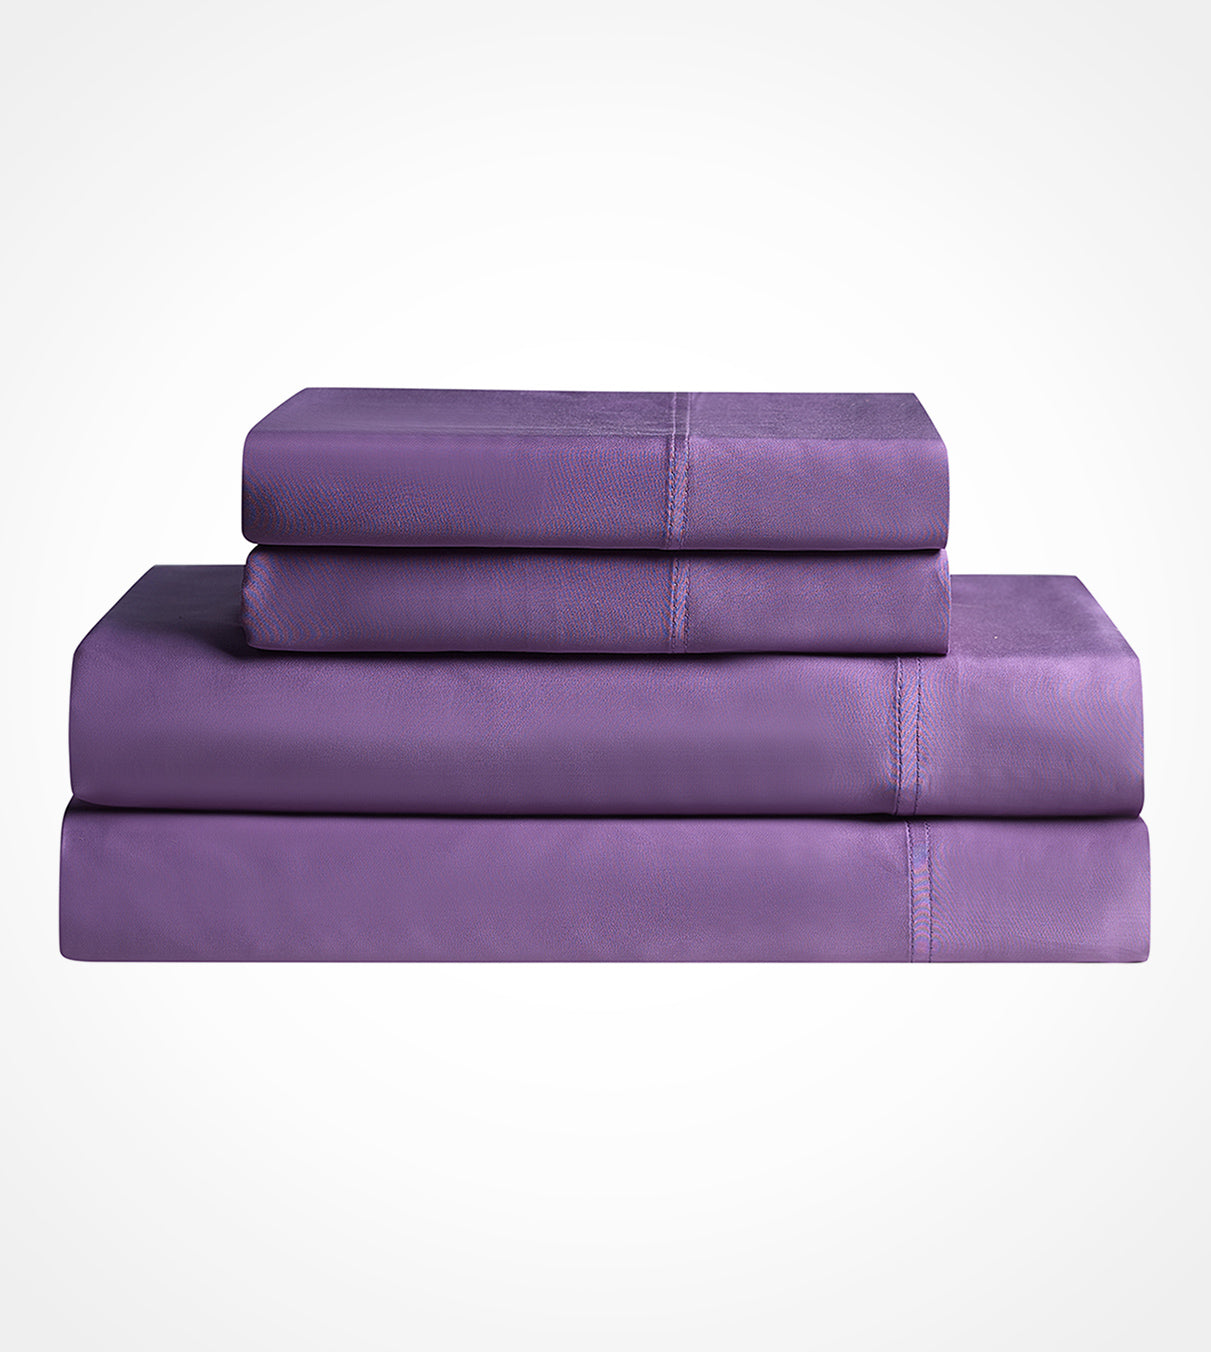 Product: Cooling Bamboo Twill Sheet Set | Color: Lavender Purple